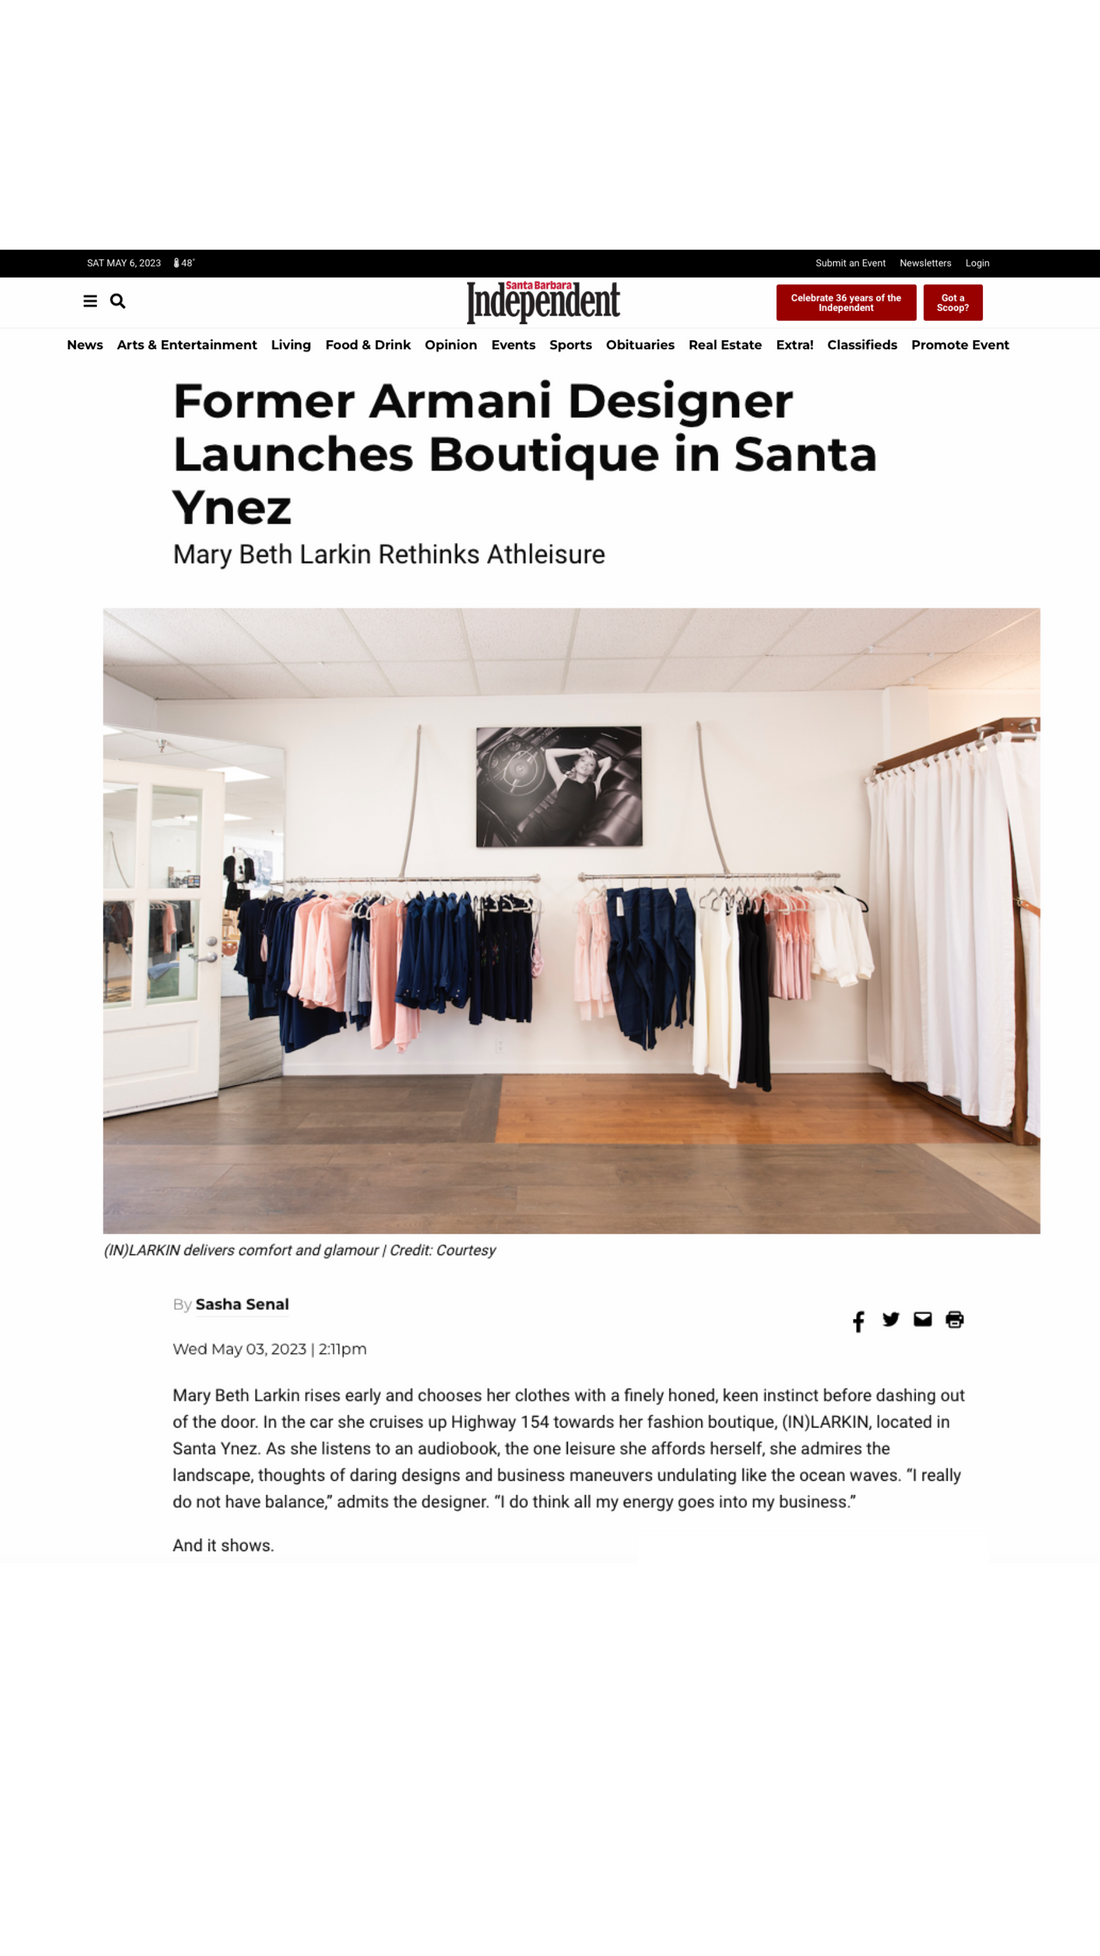  Santa Barbara Independent article about designer Mary Beth Larkin and how she launched a boutique in Santa Ynez